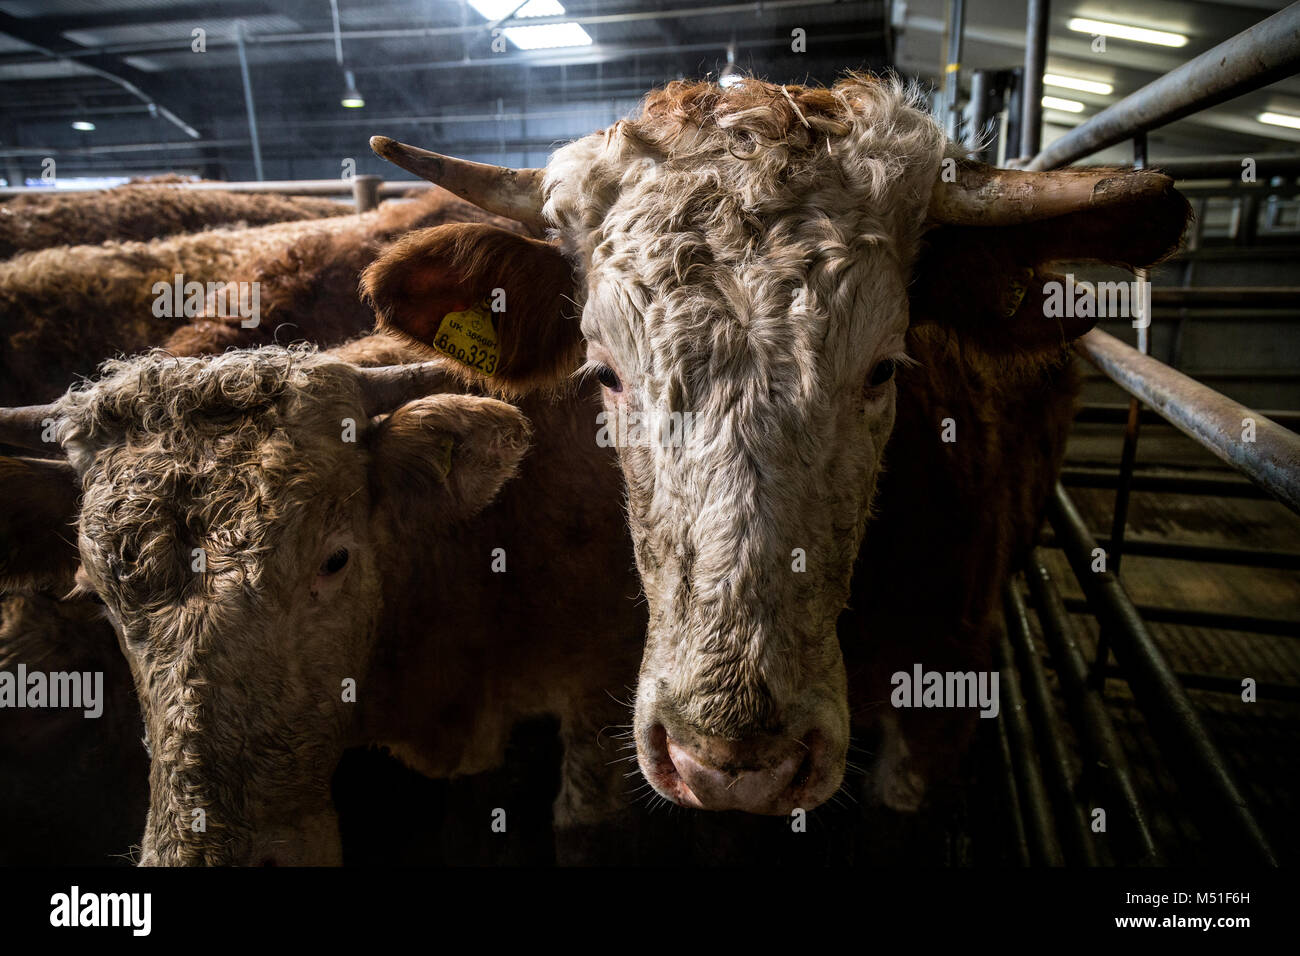 Cattle in large farm building,cattle market. hay, or straw or for housing livestock.Large ruminant animals with horns and cloven hoofs, domesticated, Stock Photo